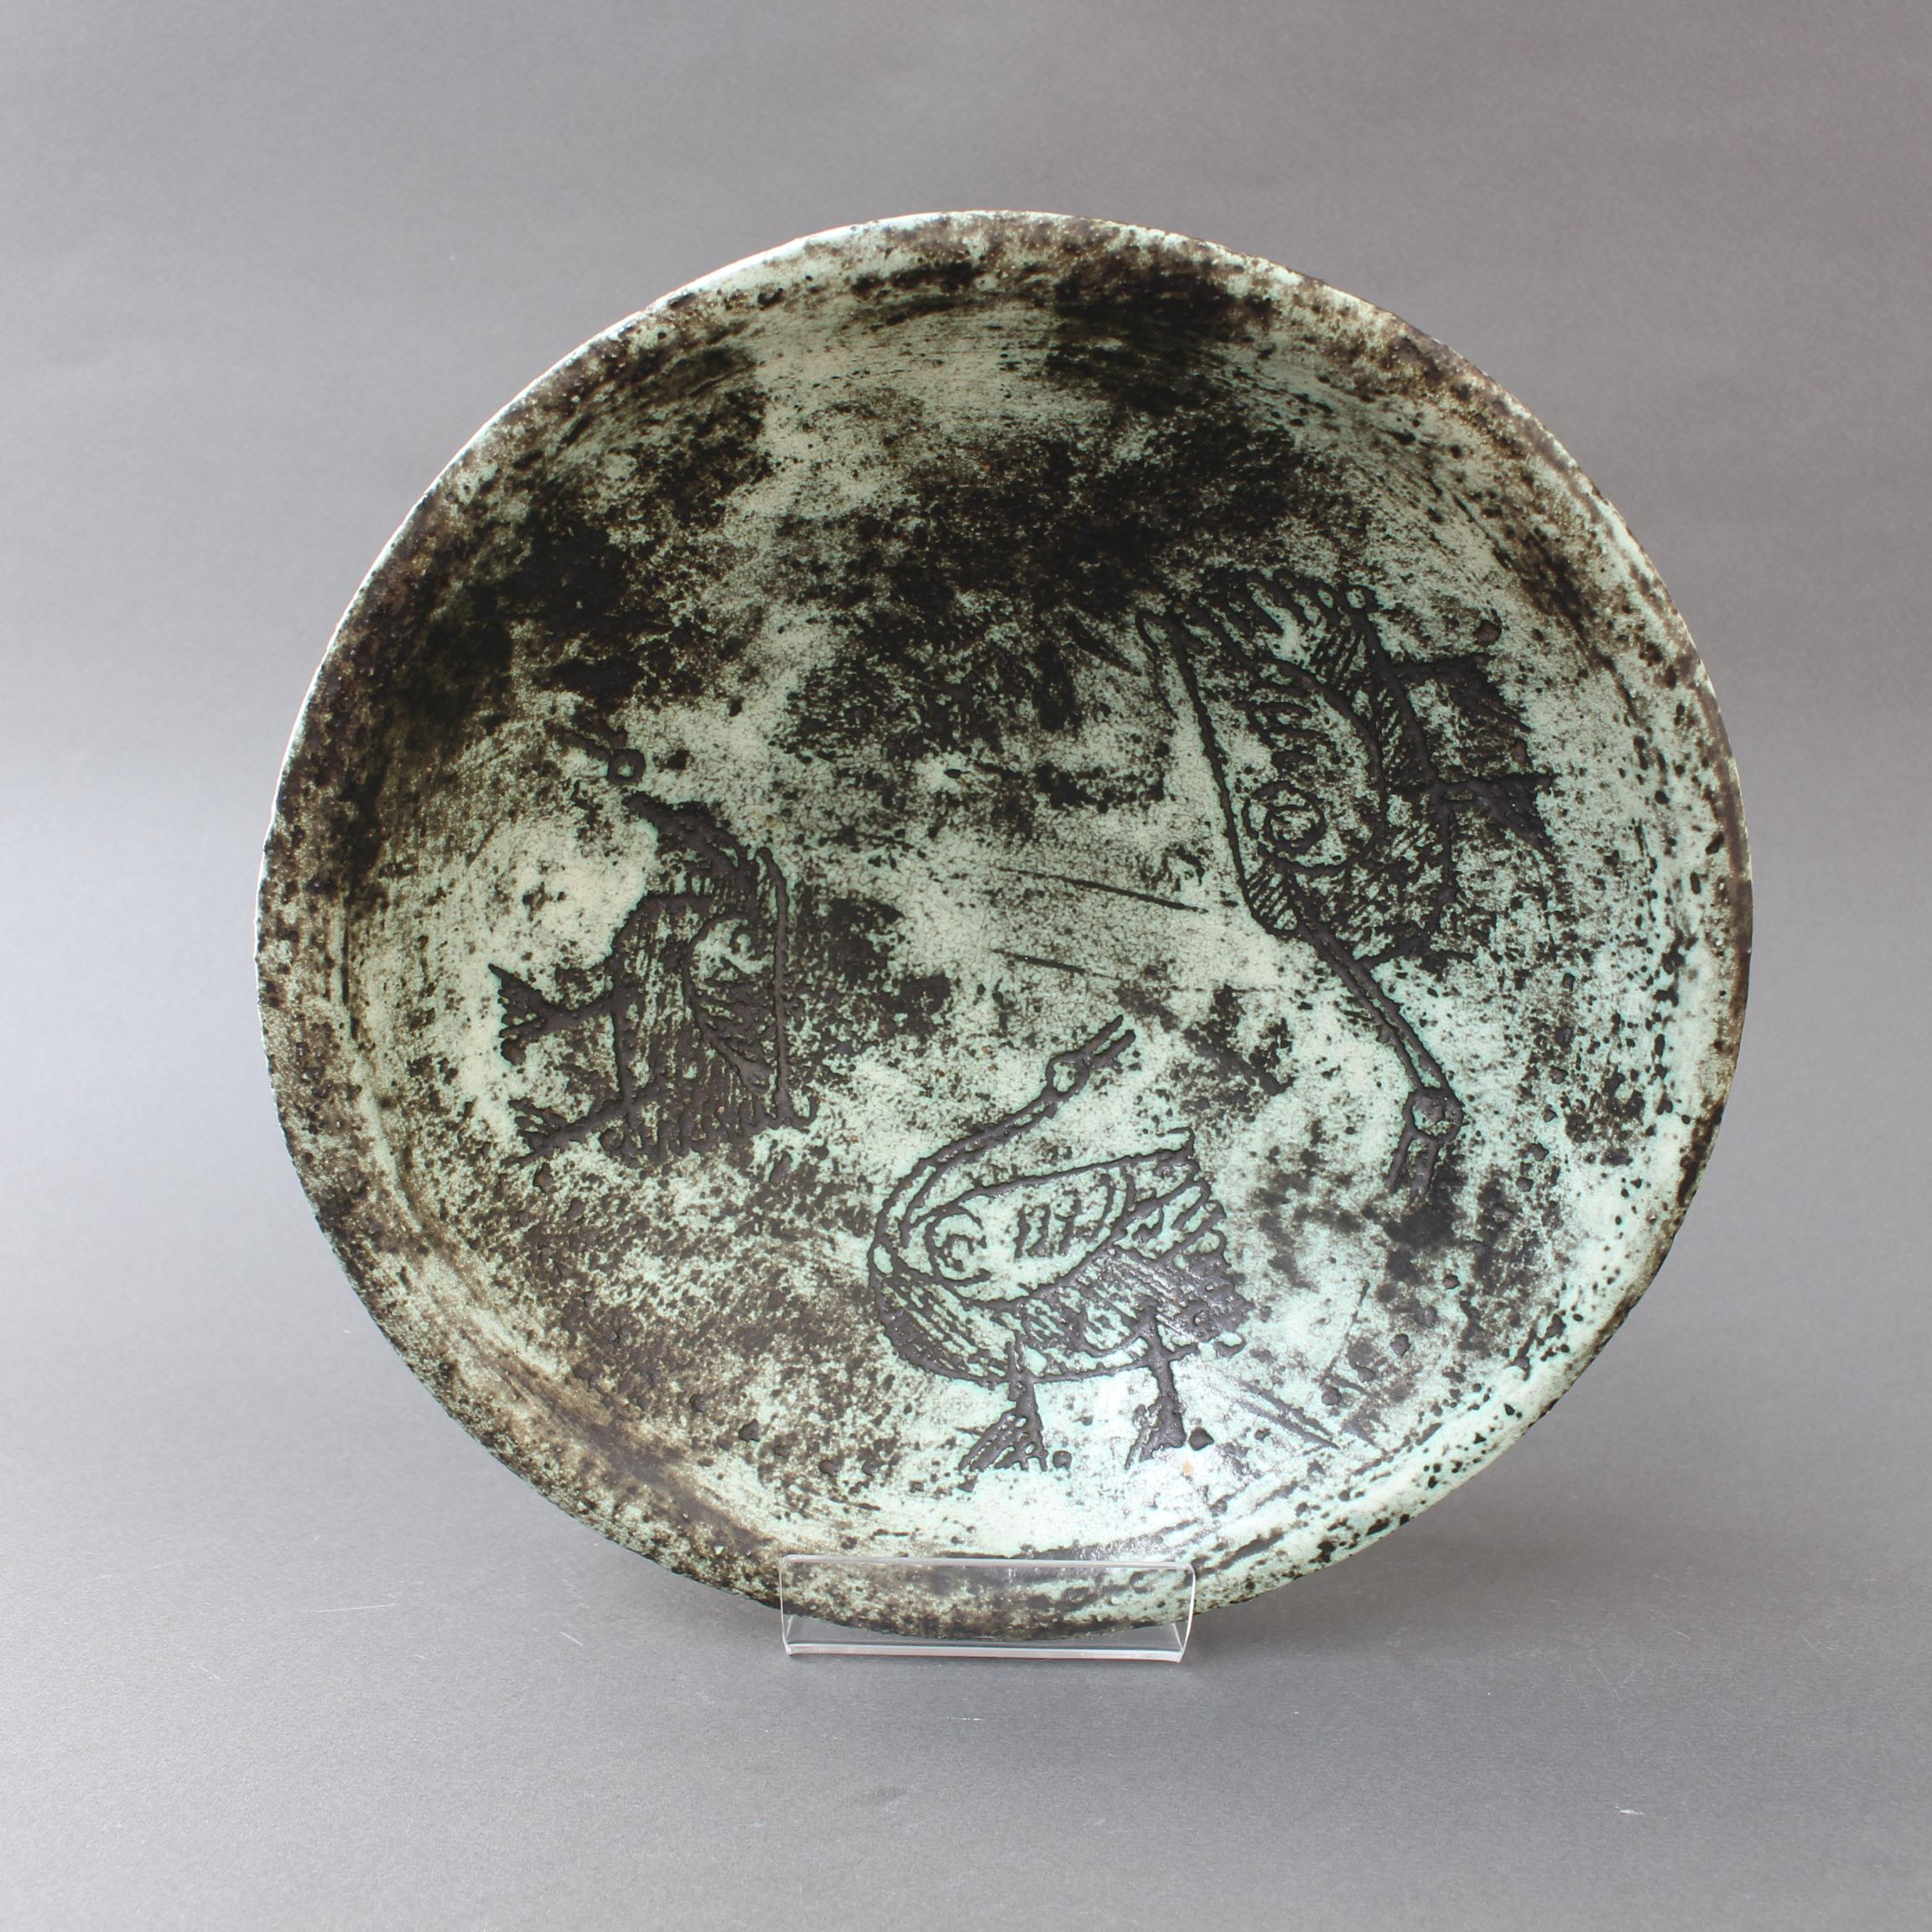 Midcentury ceramic decorative bowl by Jacques Blin (circa 1950s). Created in Blin's trademark misty glaze, this elegant bowl is incised with birds which may have just been discovered in an ancient cave filled with art. Its medium size means it would